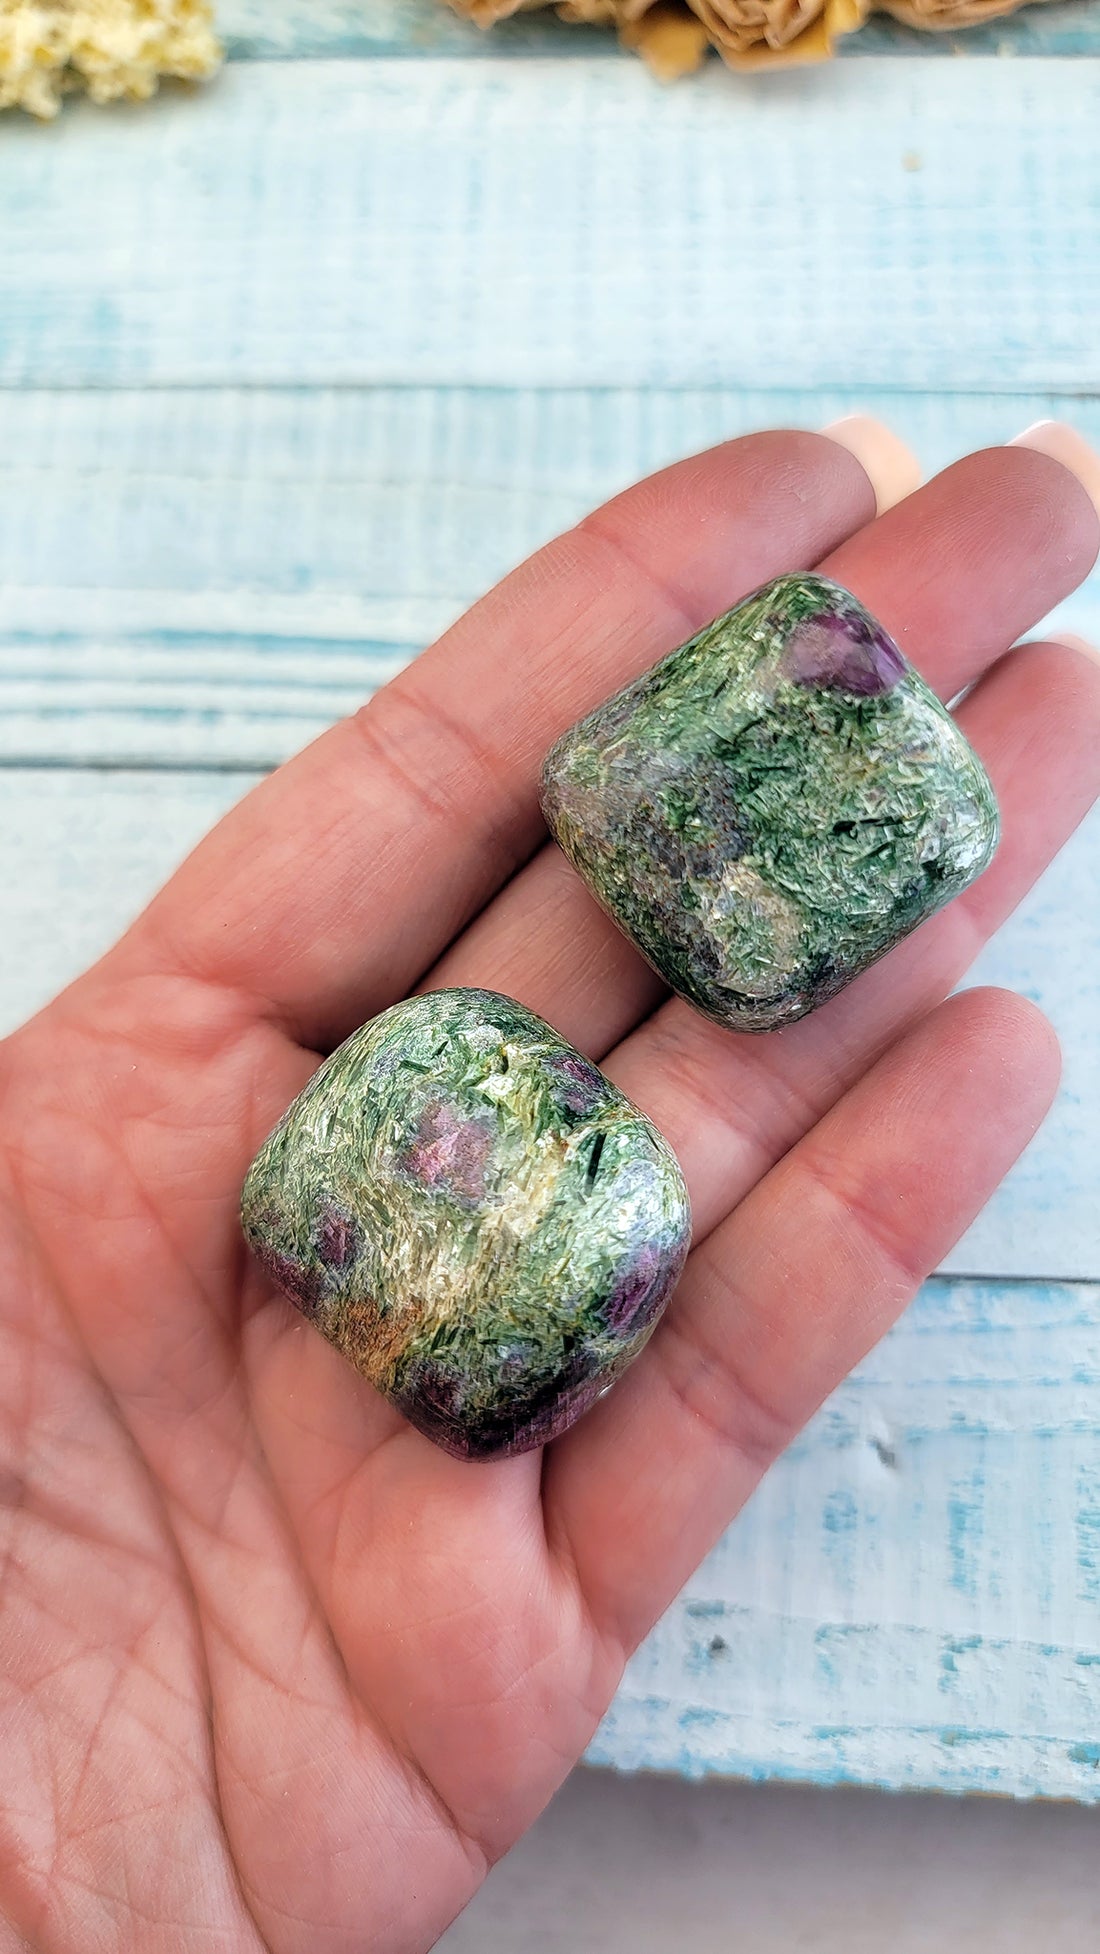 two tumbled ruby kyanite fuchsite crystal pieces in hand